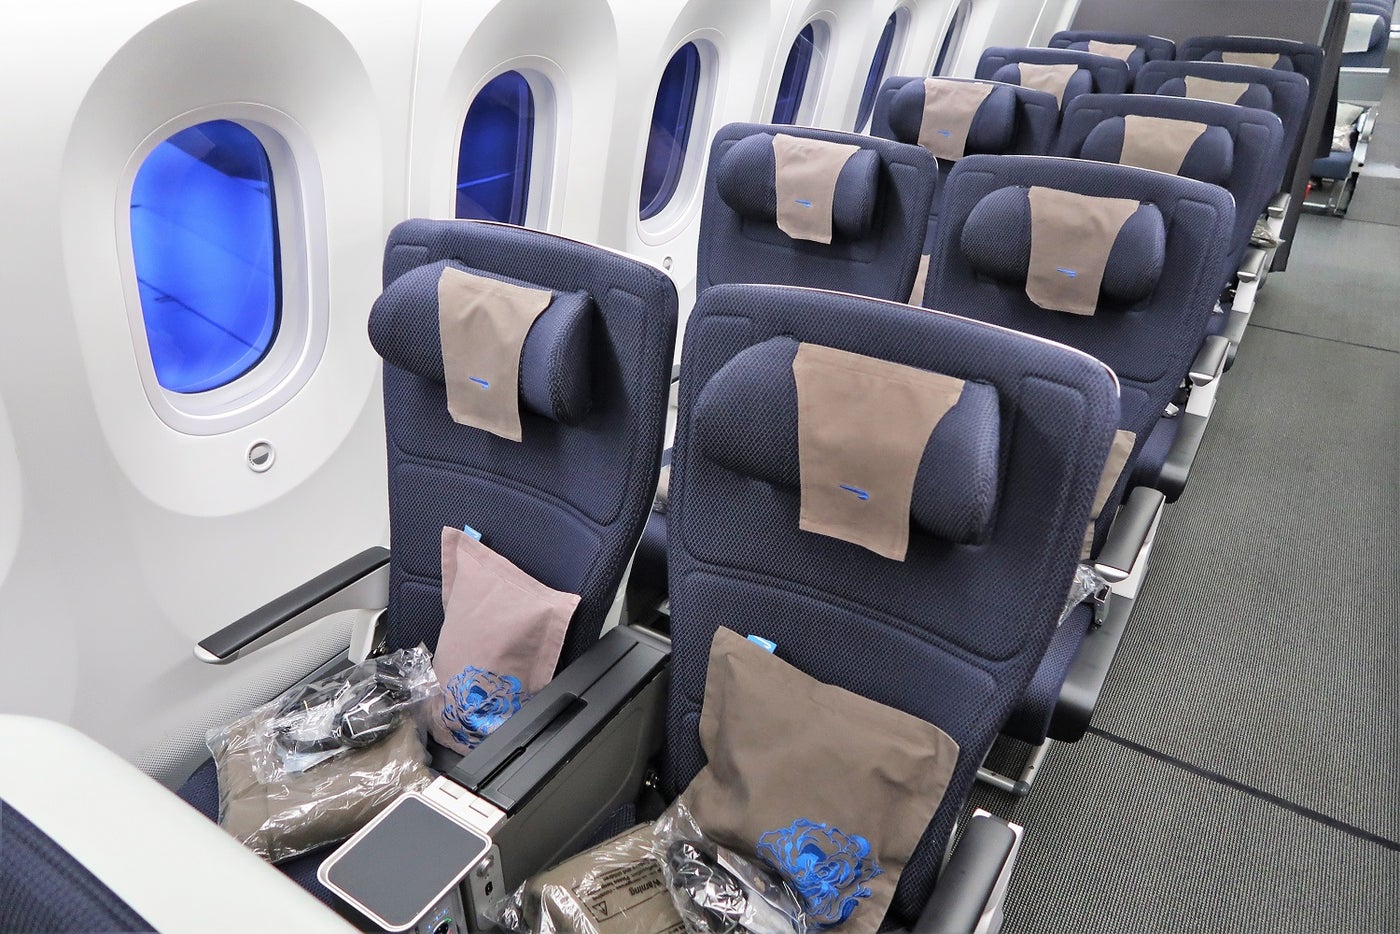 Review: BA Premium Economy on the B787-8, 787-9 and 747